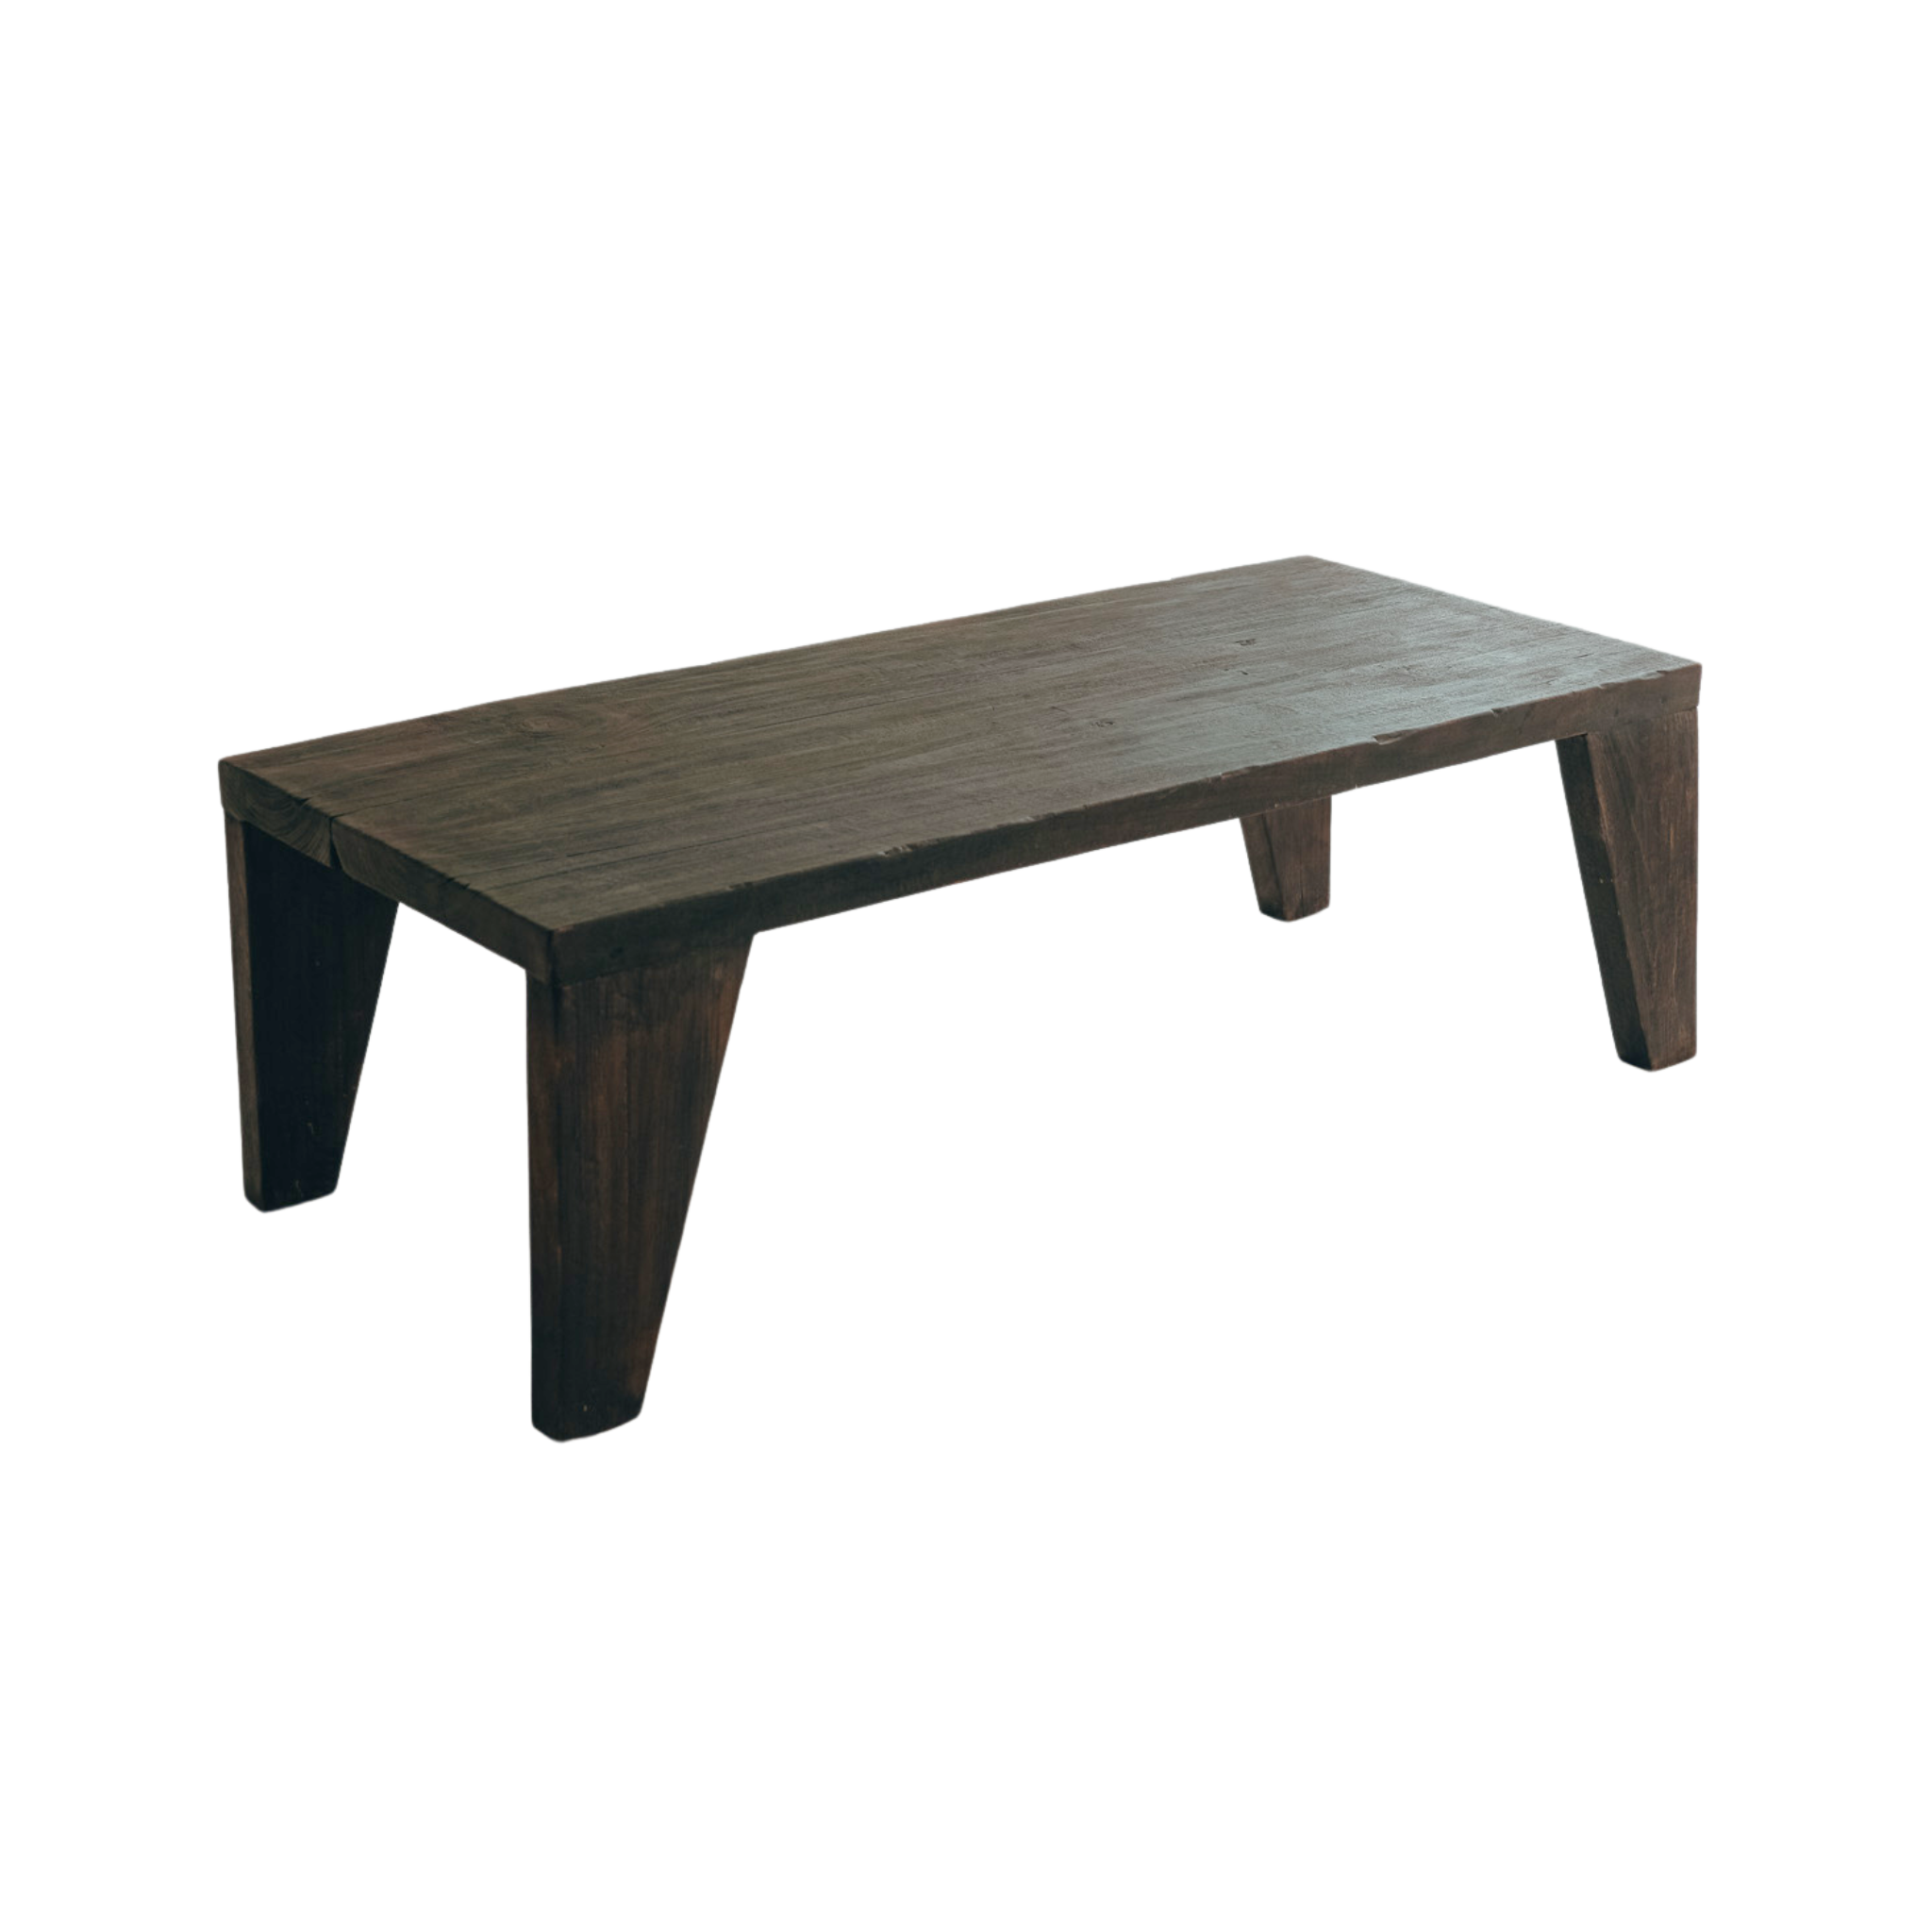 THE ALONSO TABLE